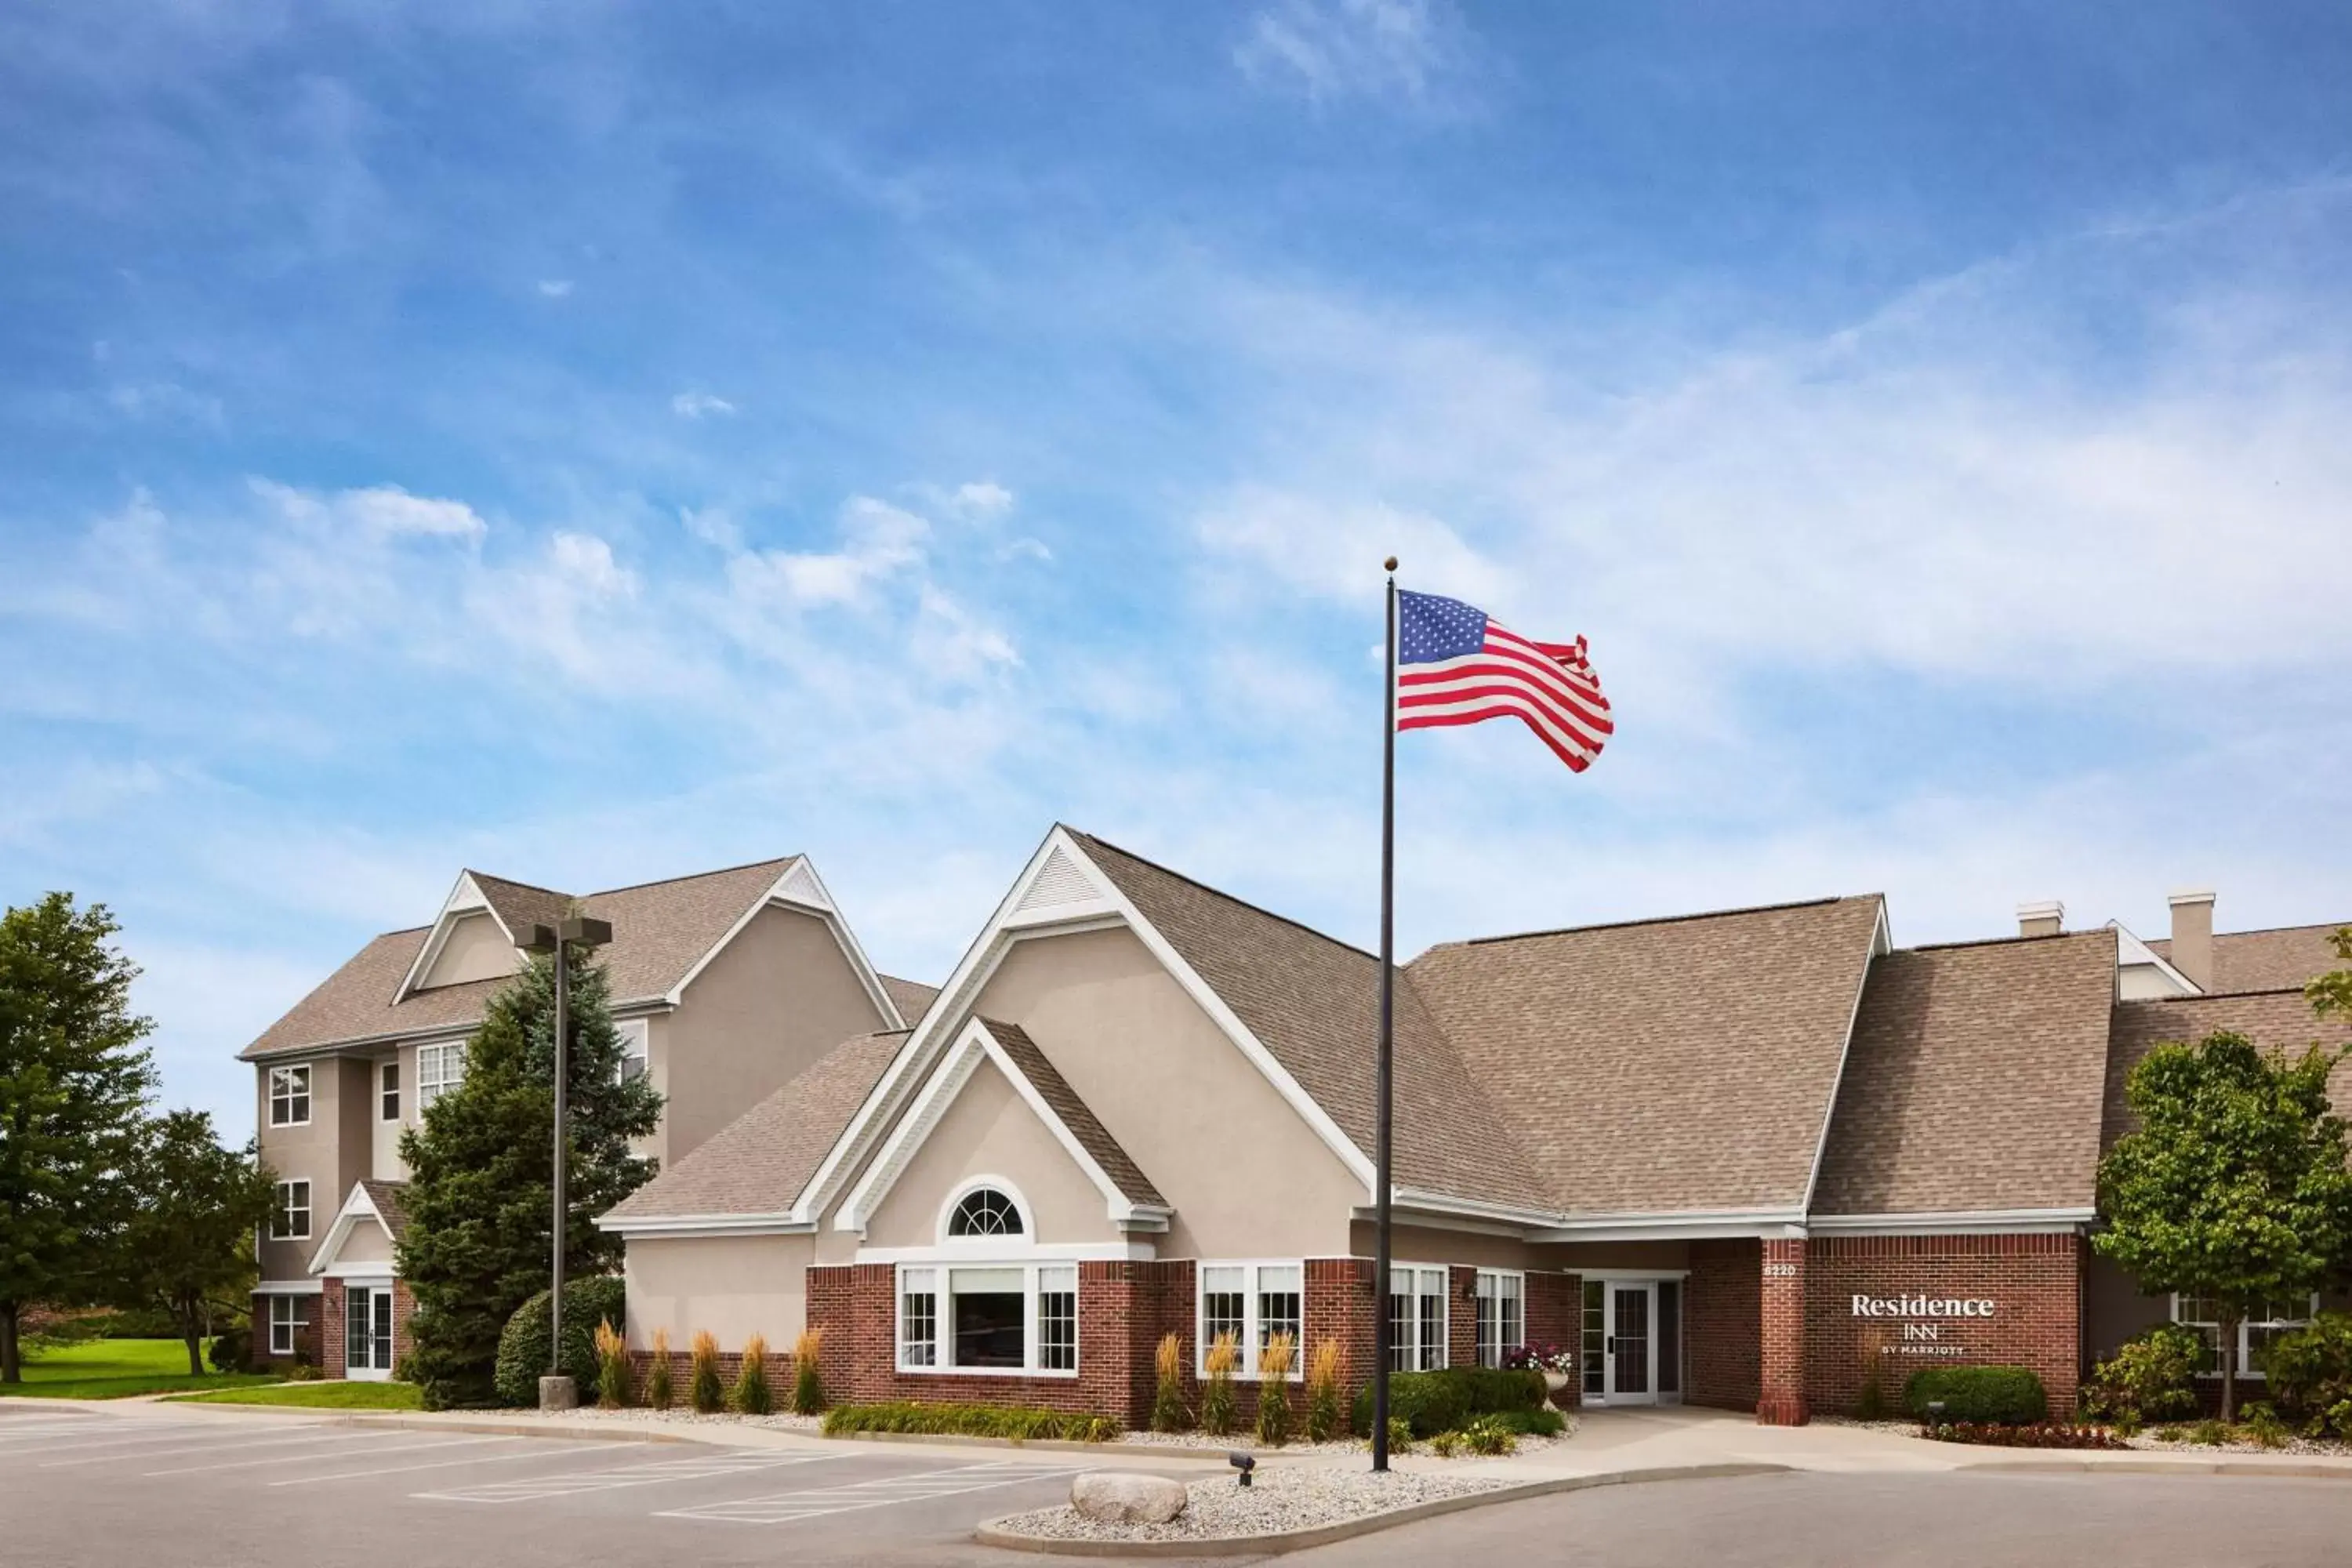 Property Building in Residence Inn Indianapolis Northwest